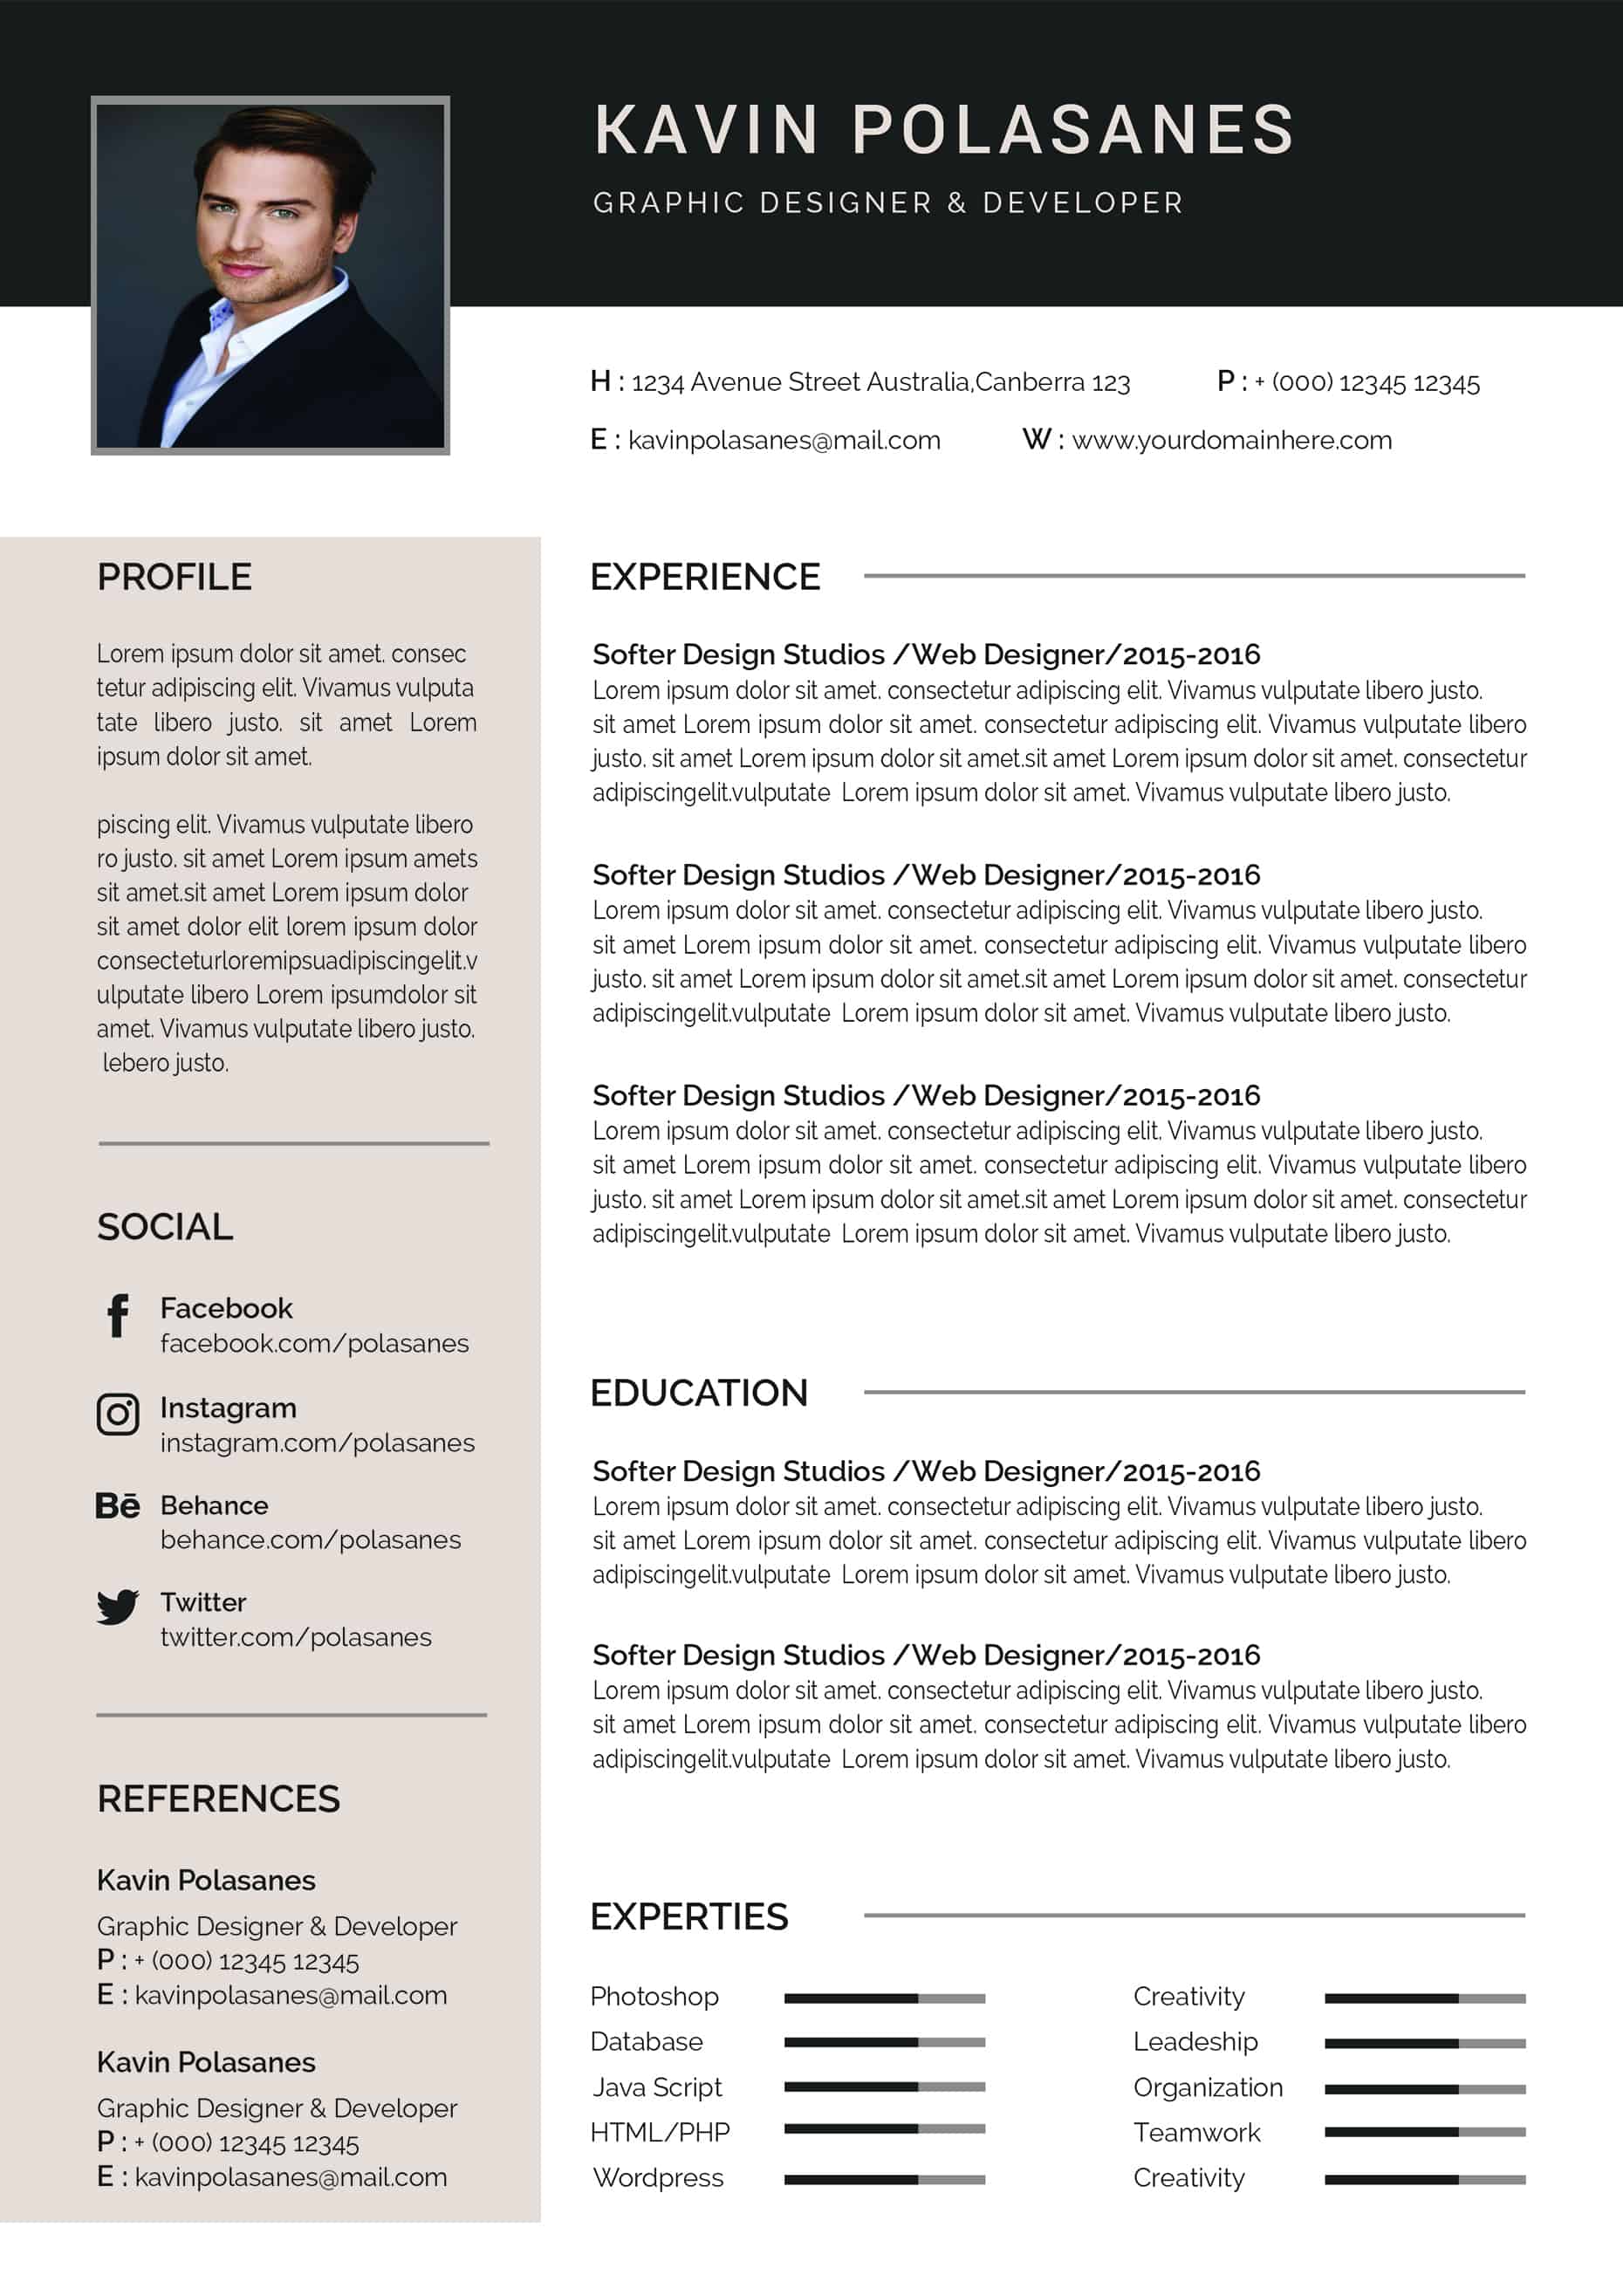 Microsoft Word Templates For Resume Bermomiss